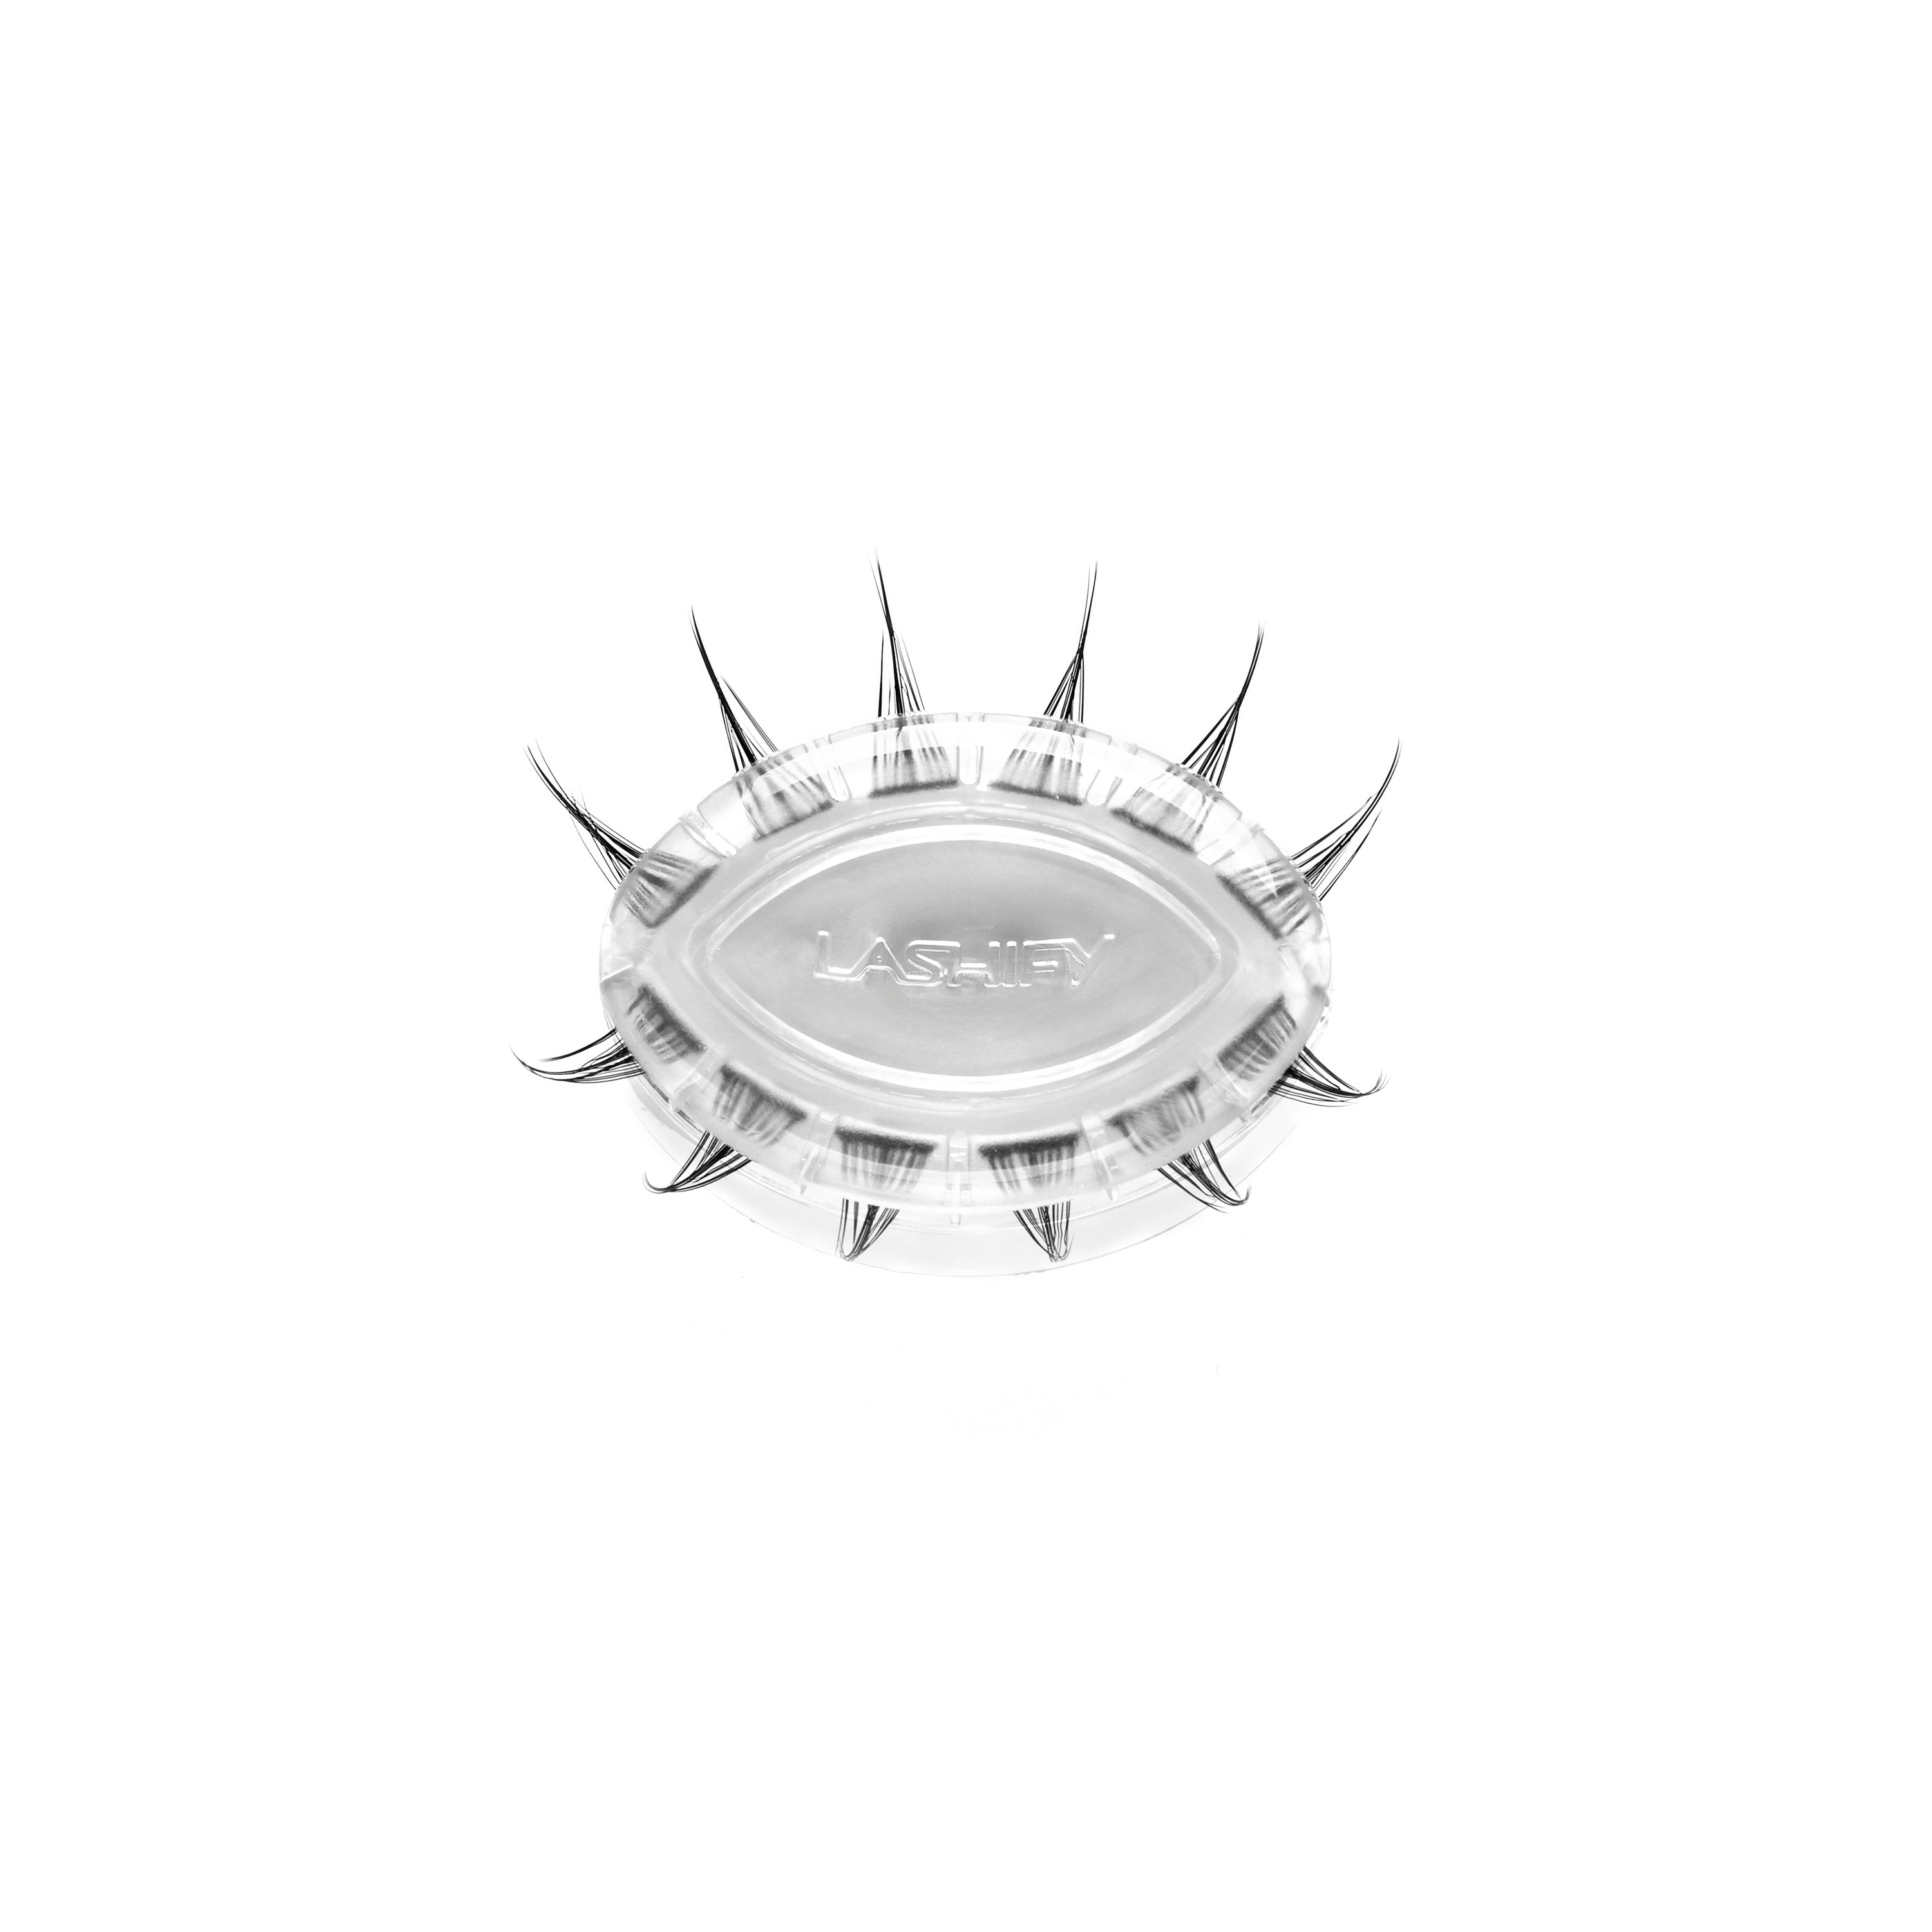 Cherry Stax™ Gossamer® Lashes - Pro Pack (2 Count)